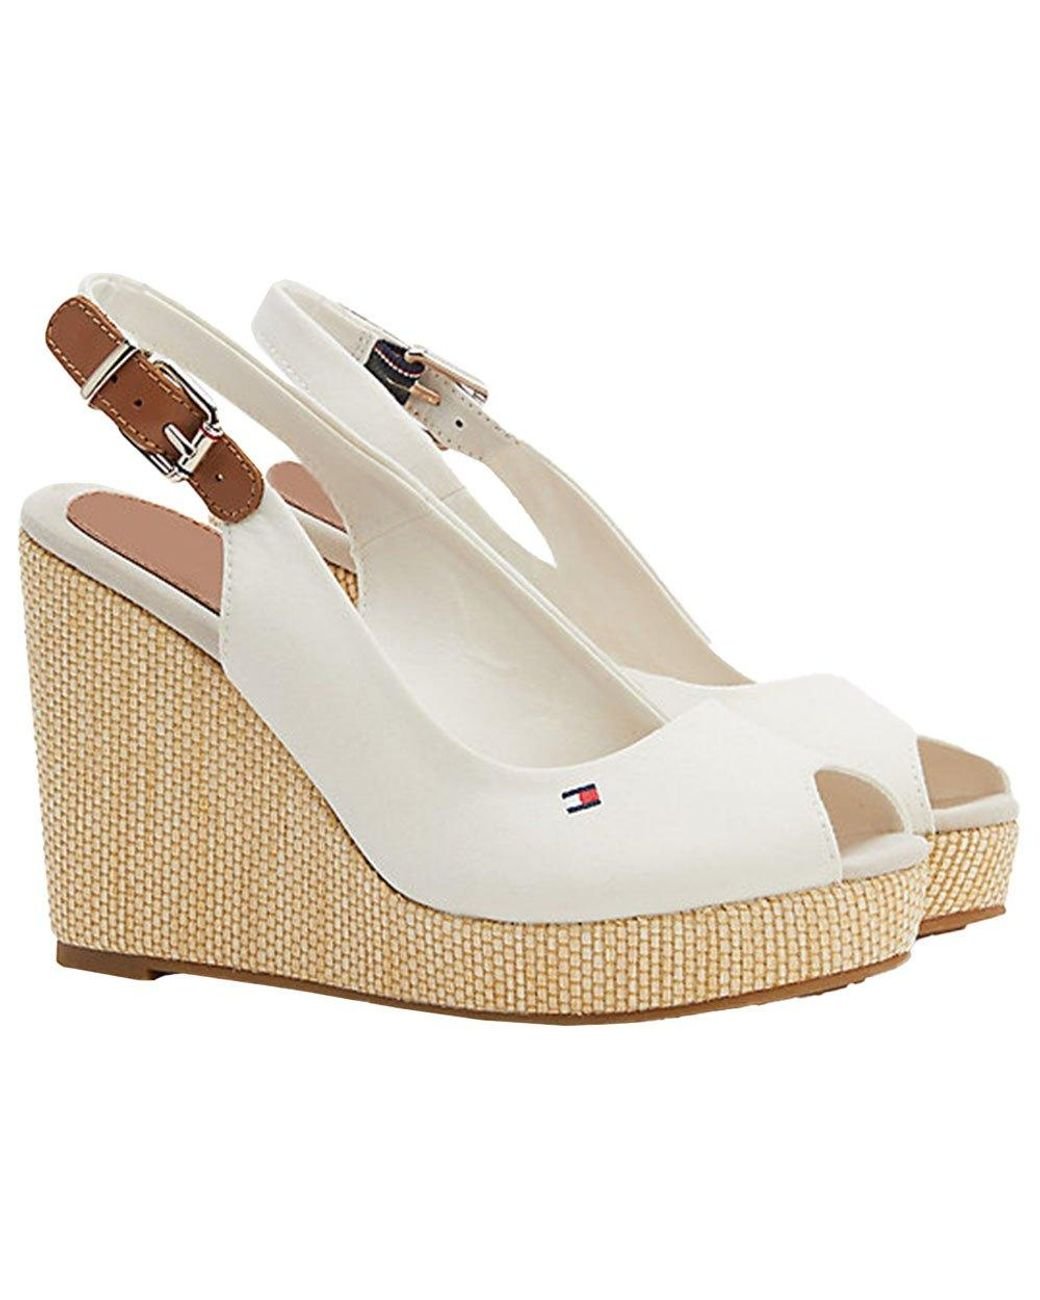 Tommy Hilfiger Iconic Elena Sling Back Wedge Sandals in White | Lyst